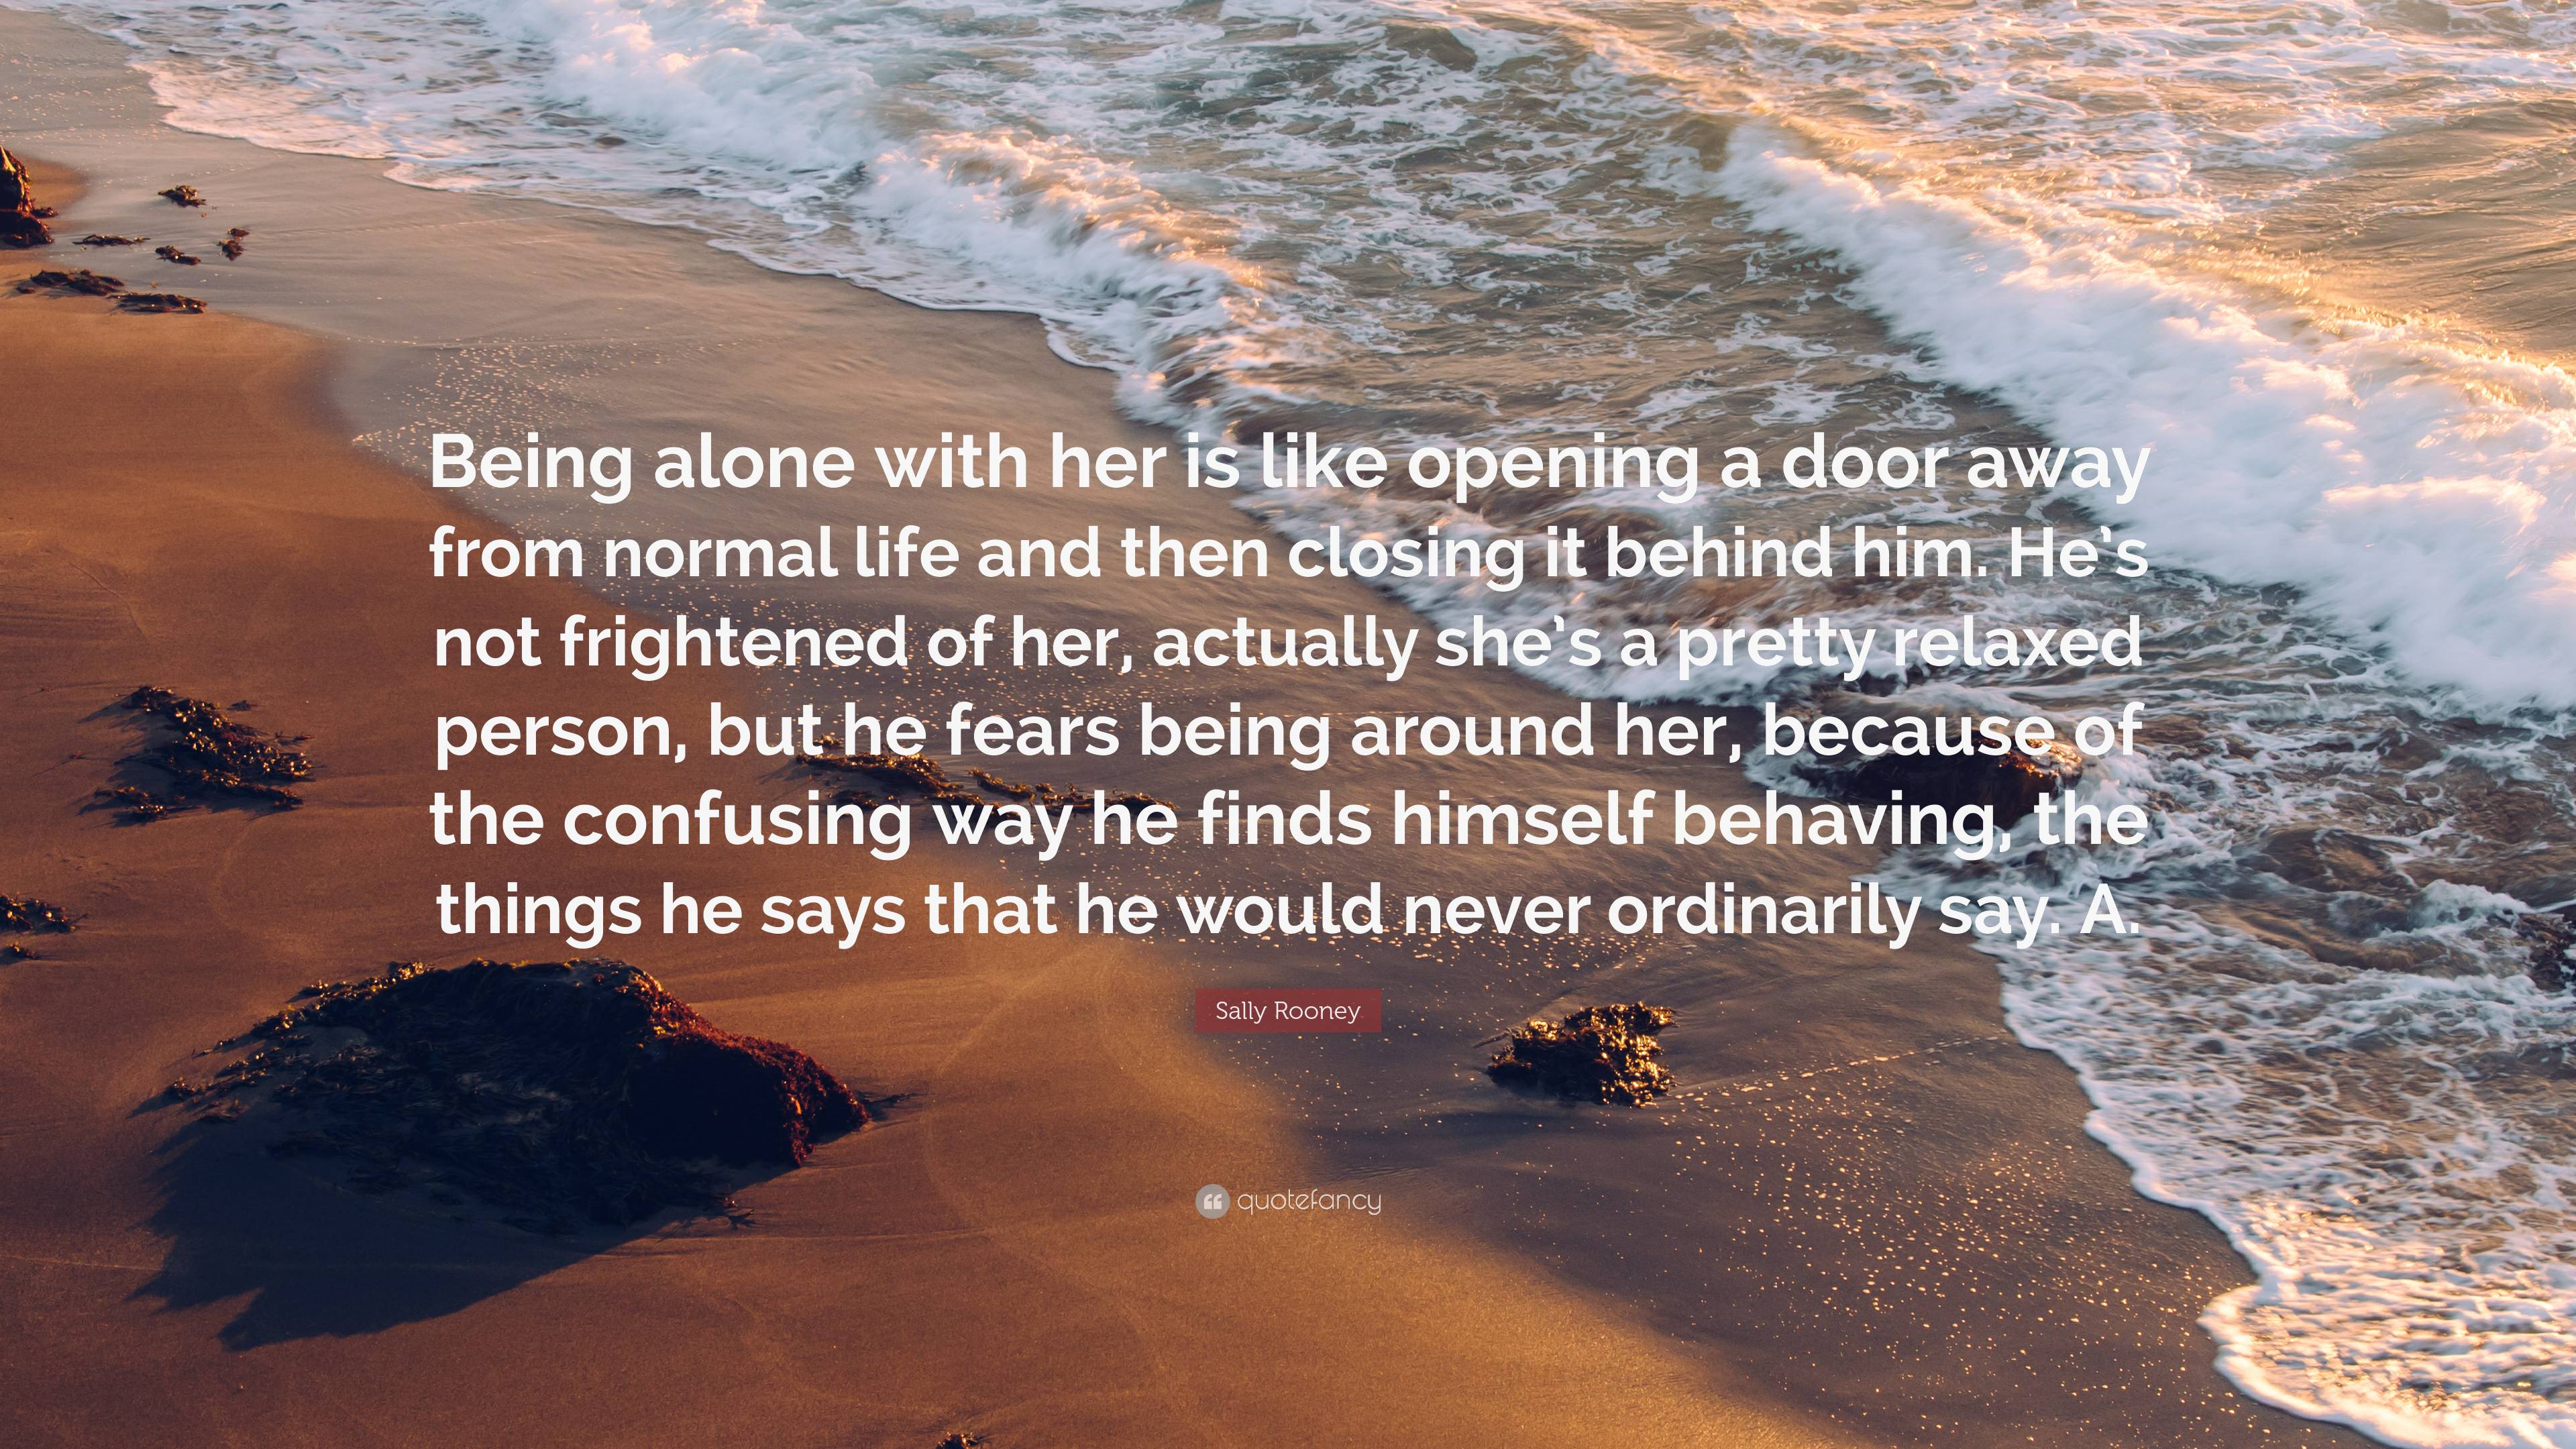 Sally Rooney Quote: “Being alone with her is like opening a door away ...